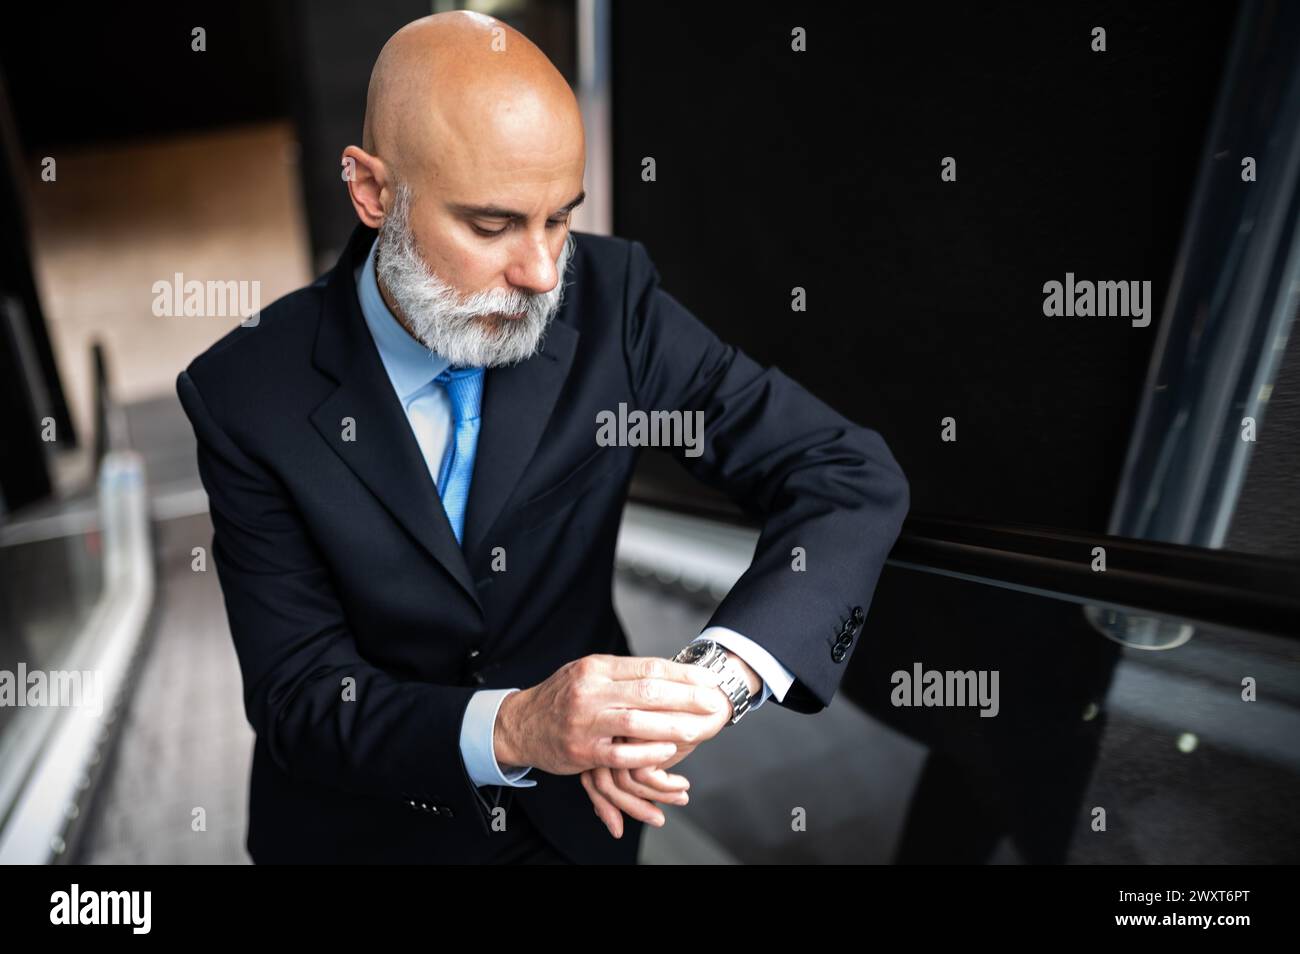 Mature bald stylish business man portrait with a white beard on mobile stairs holding his watch to check time Stock Photo